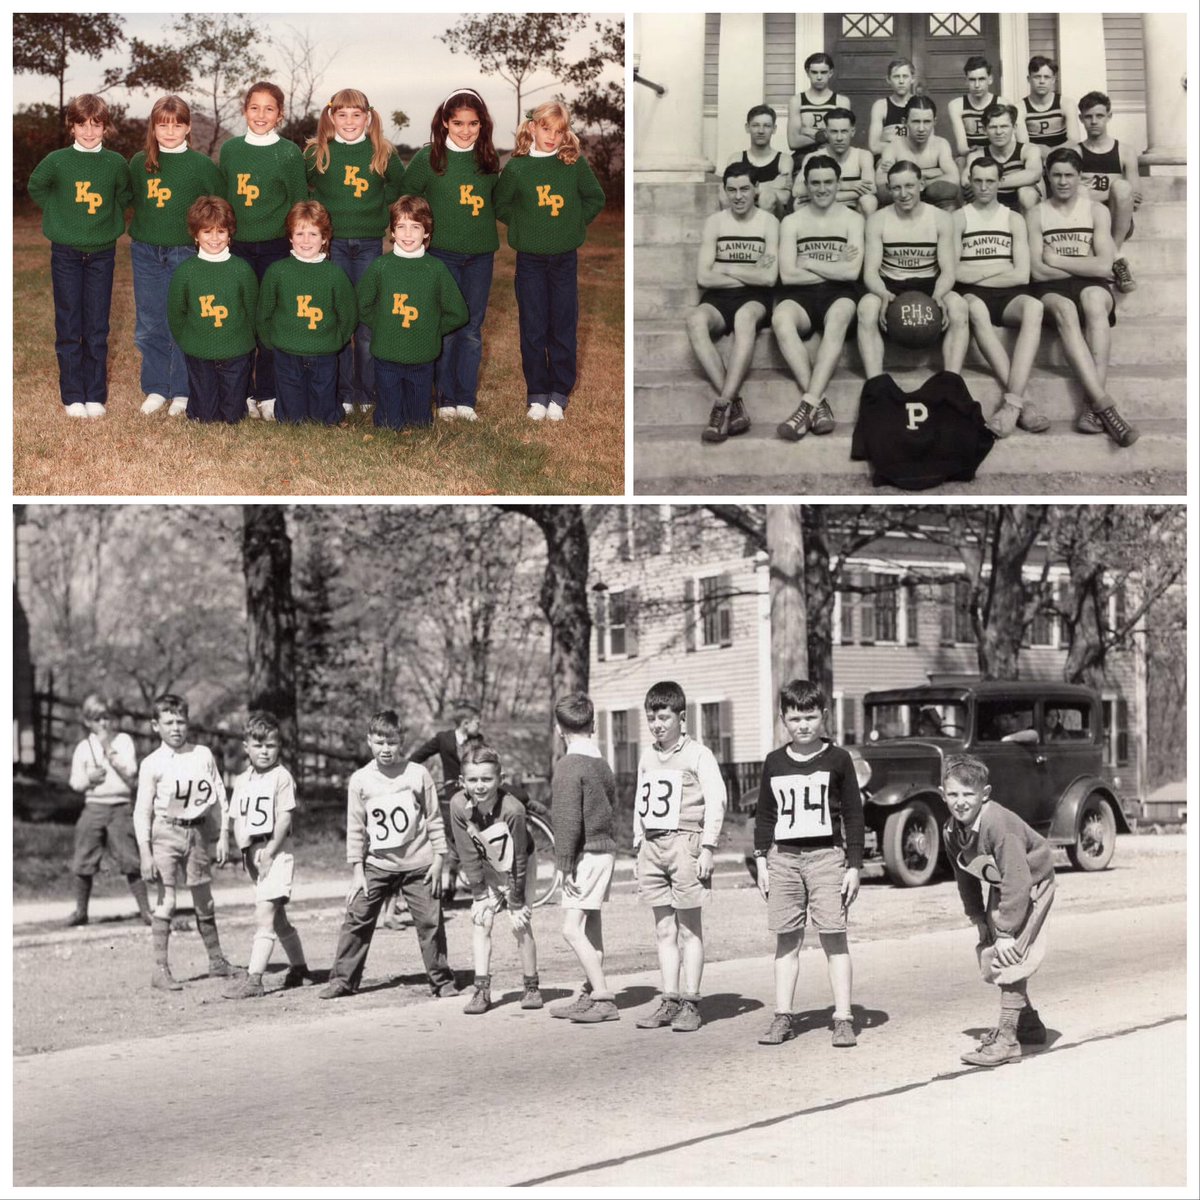 Today’s #ArchiveAdventCalendar theme is #ChristmasJumper which seem to be a tricky find for us. Let alone Christmas 1’s (though KP’s cheer are a Christmas green!) Weirdly if we look in Sports, loads of sweaters! Including basketball & marathons. Yikes!
#PlainvilleMa 
@ARAScot